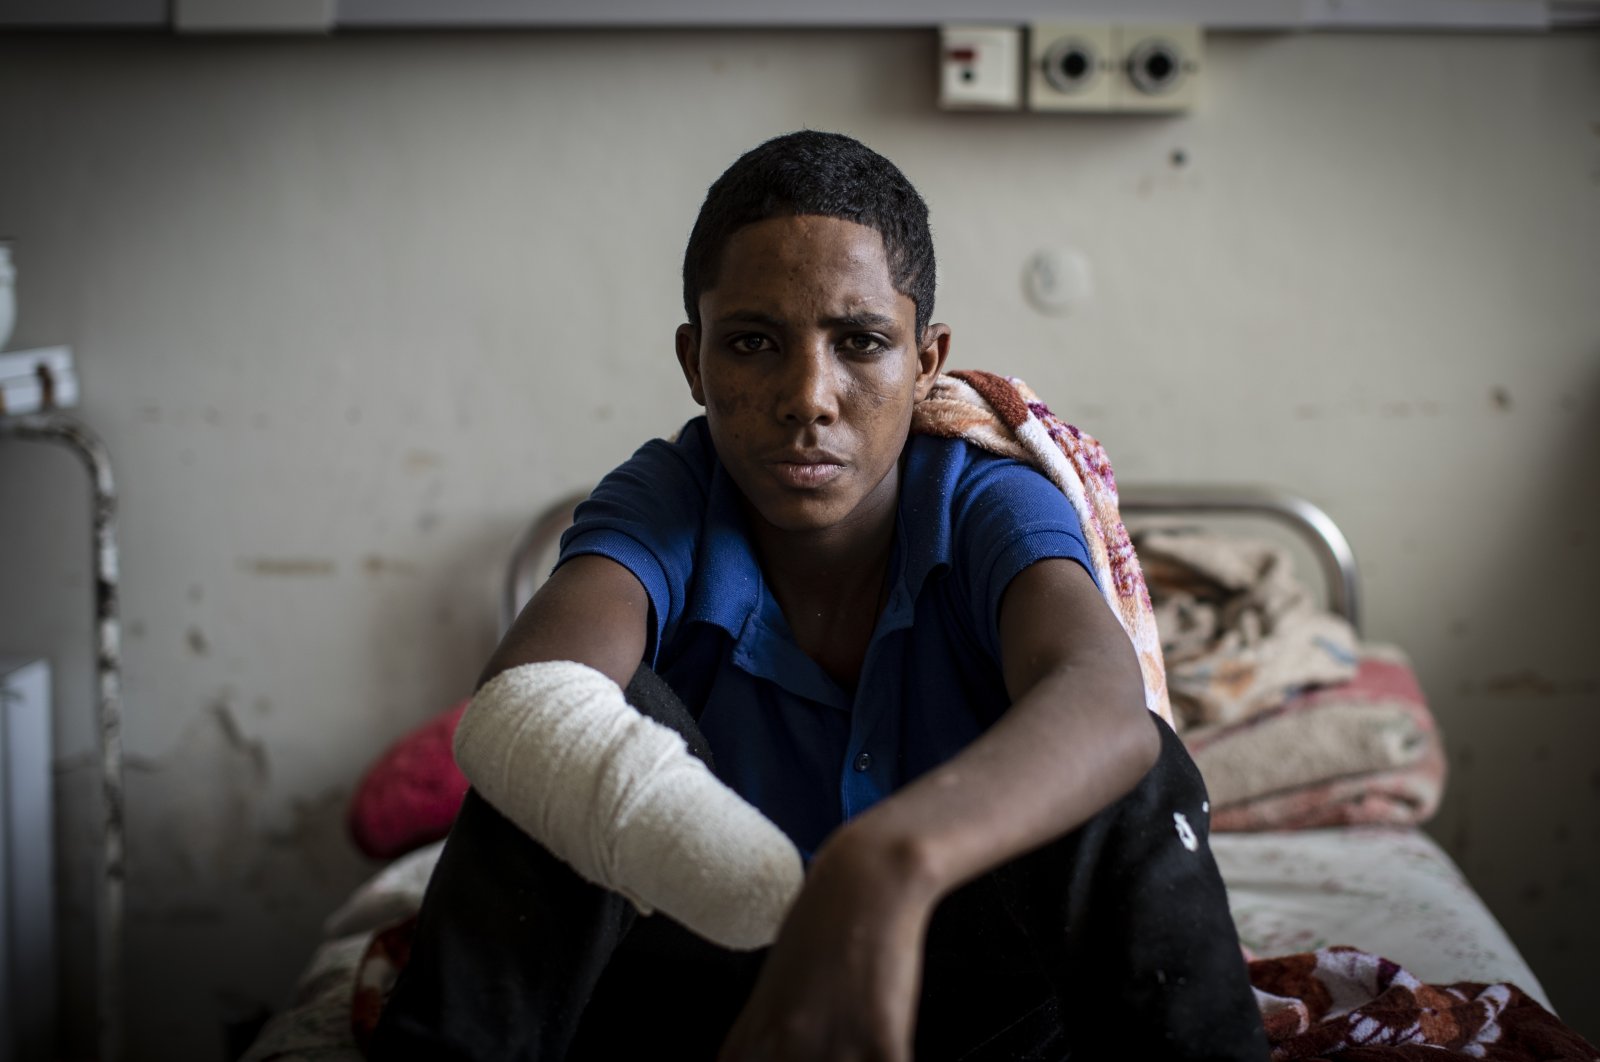 Haftom Gebretsadik, a 17-year-old from Freweini, Ethiopia, near Hawzen, who had his right hand amputated and lost fingers on his left after an artillery round struck his home in March, sits on his bed at the Ayder Referral Hospital in Mekele, in the Tigray region of northern Ethiopia, May 6, 2021. (AP Photo)